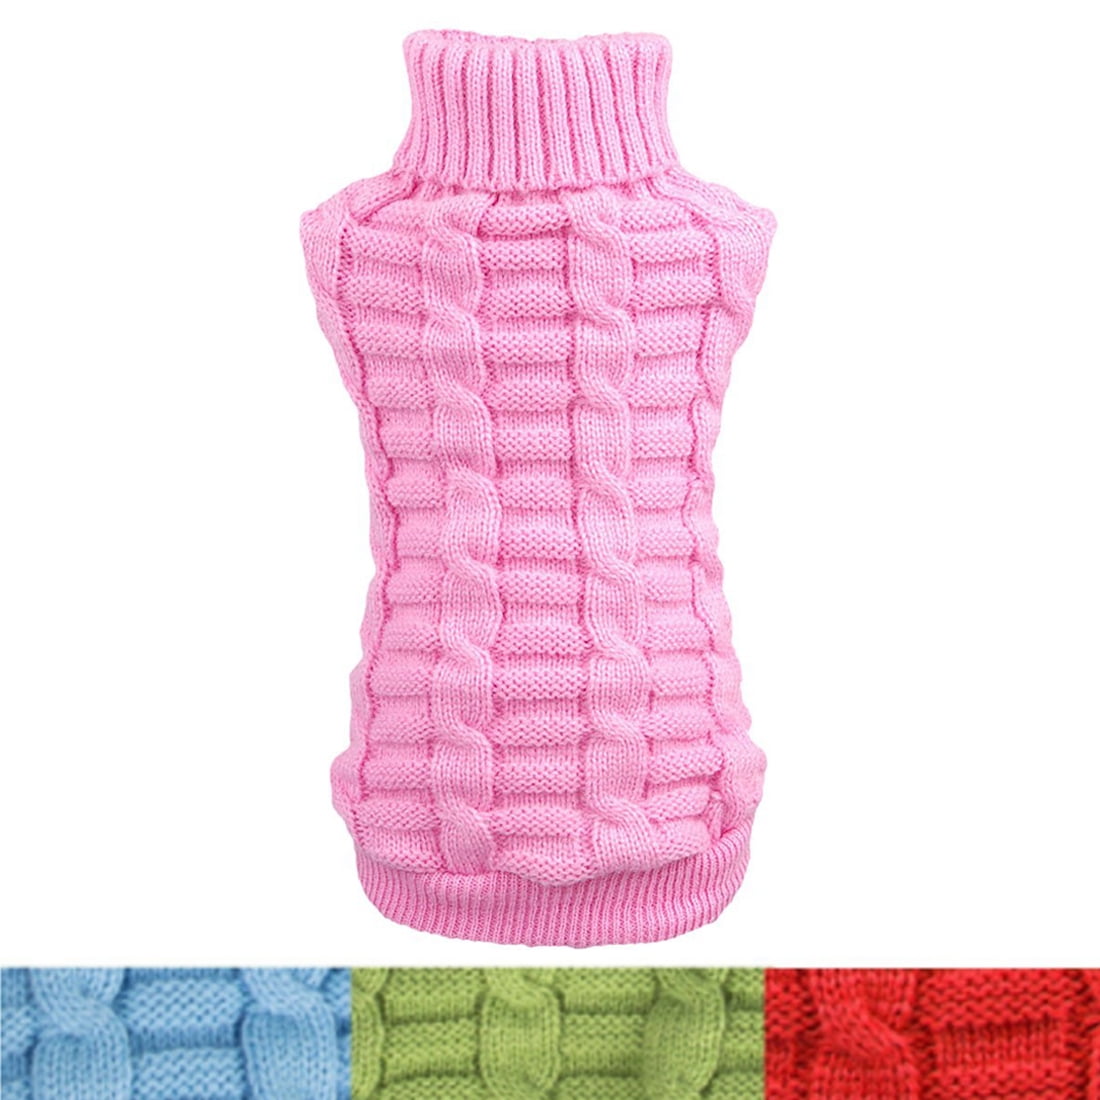 Details about   XX Lrg 8" x 12" Extra Thick Knit Hot Pads YOU CHOOSE COLOR